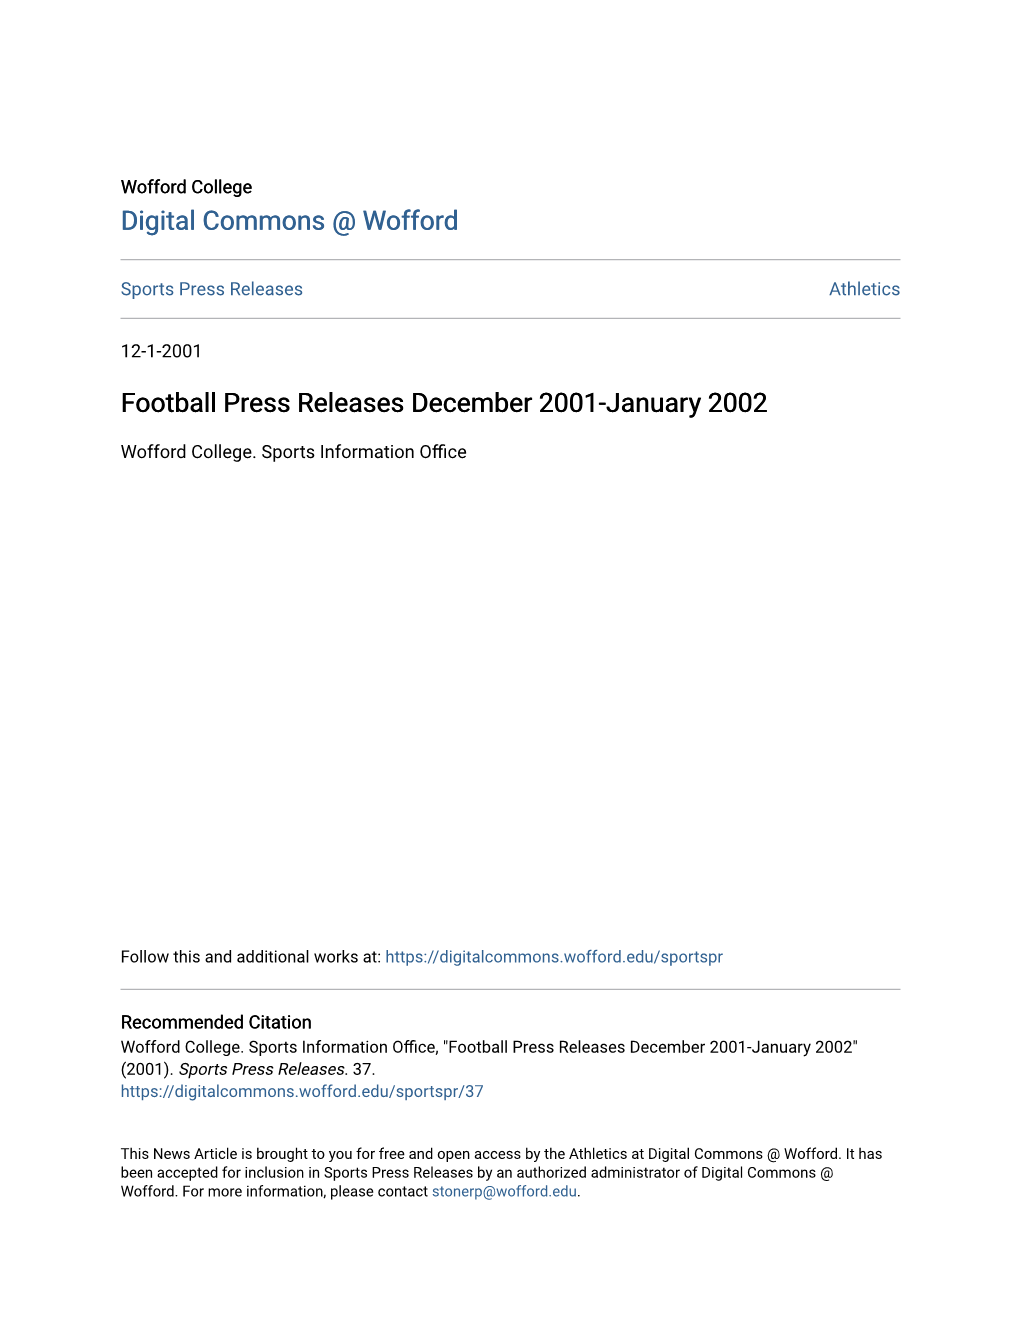 Football Press Releases December 2001-January 2002